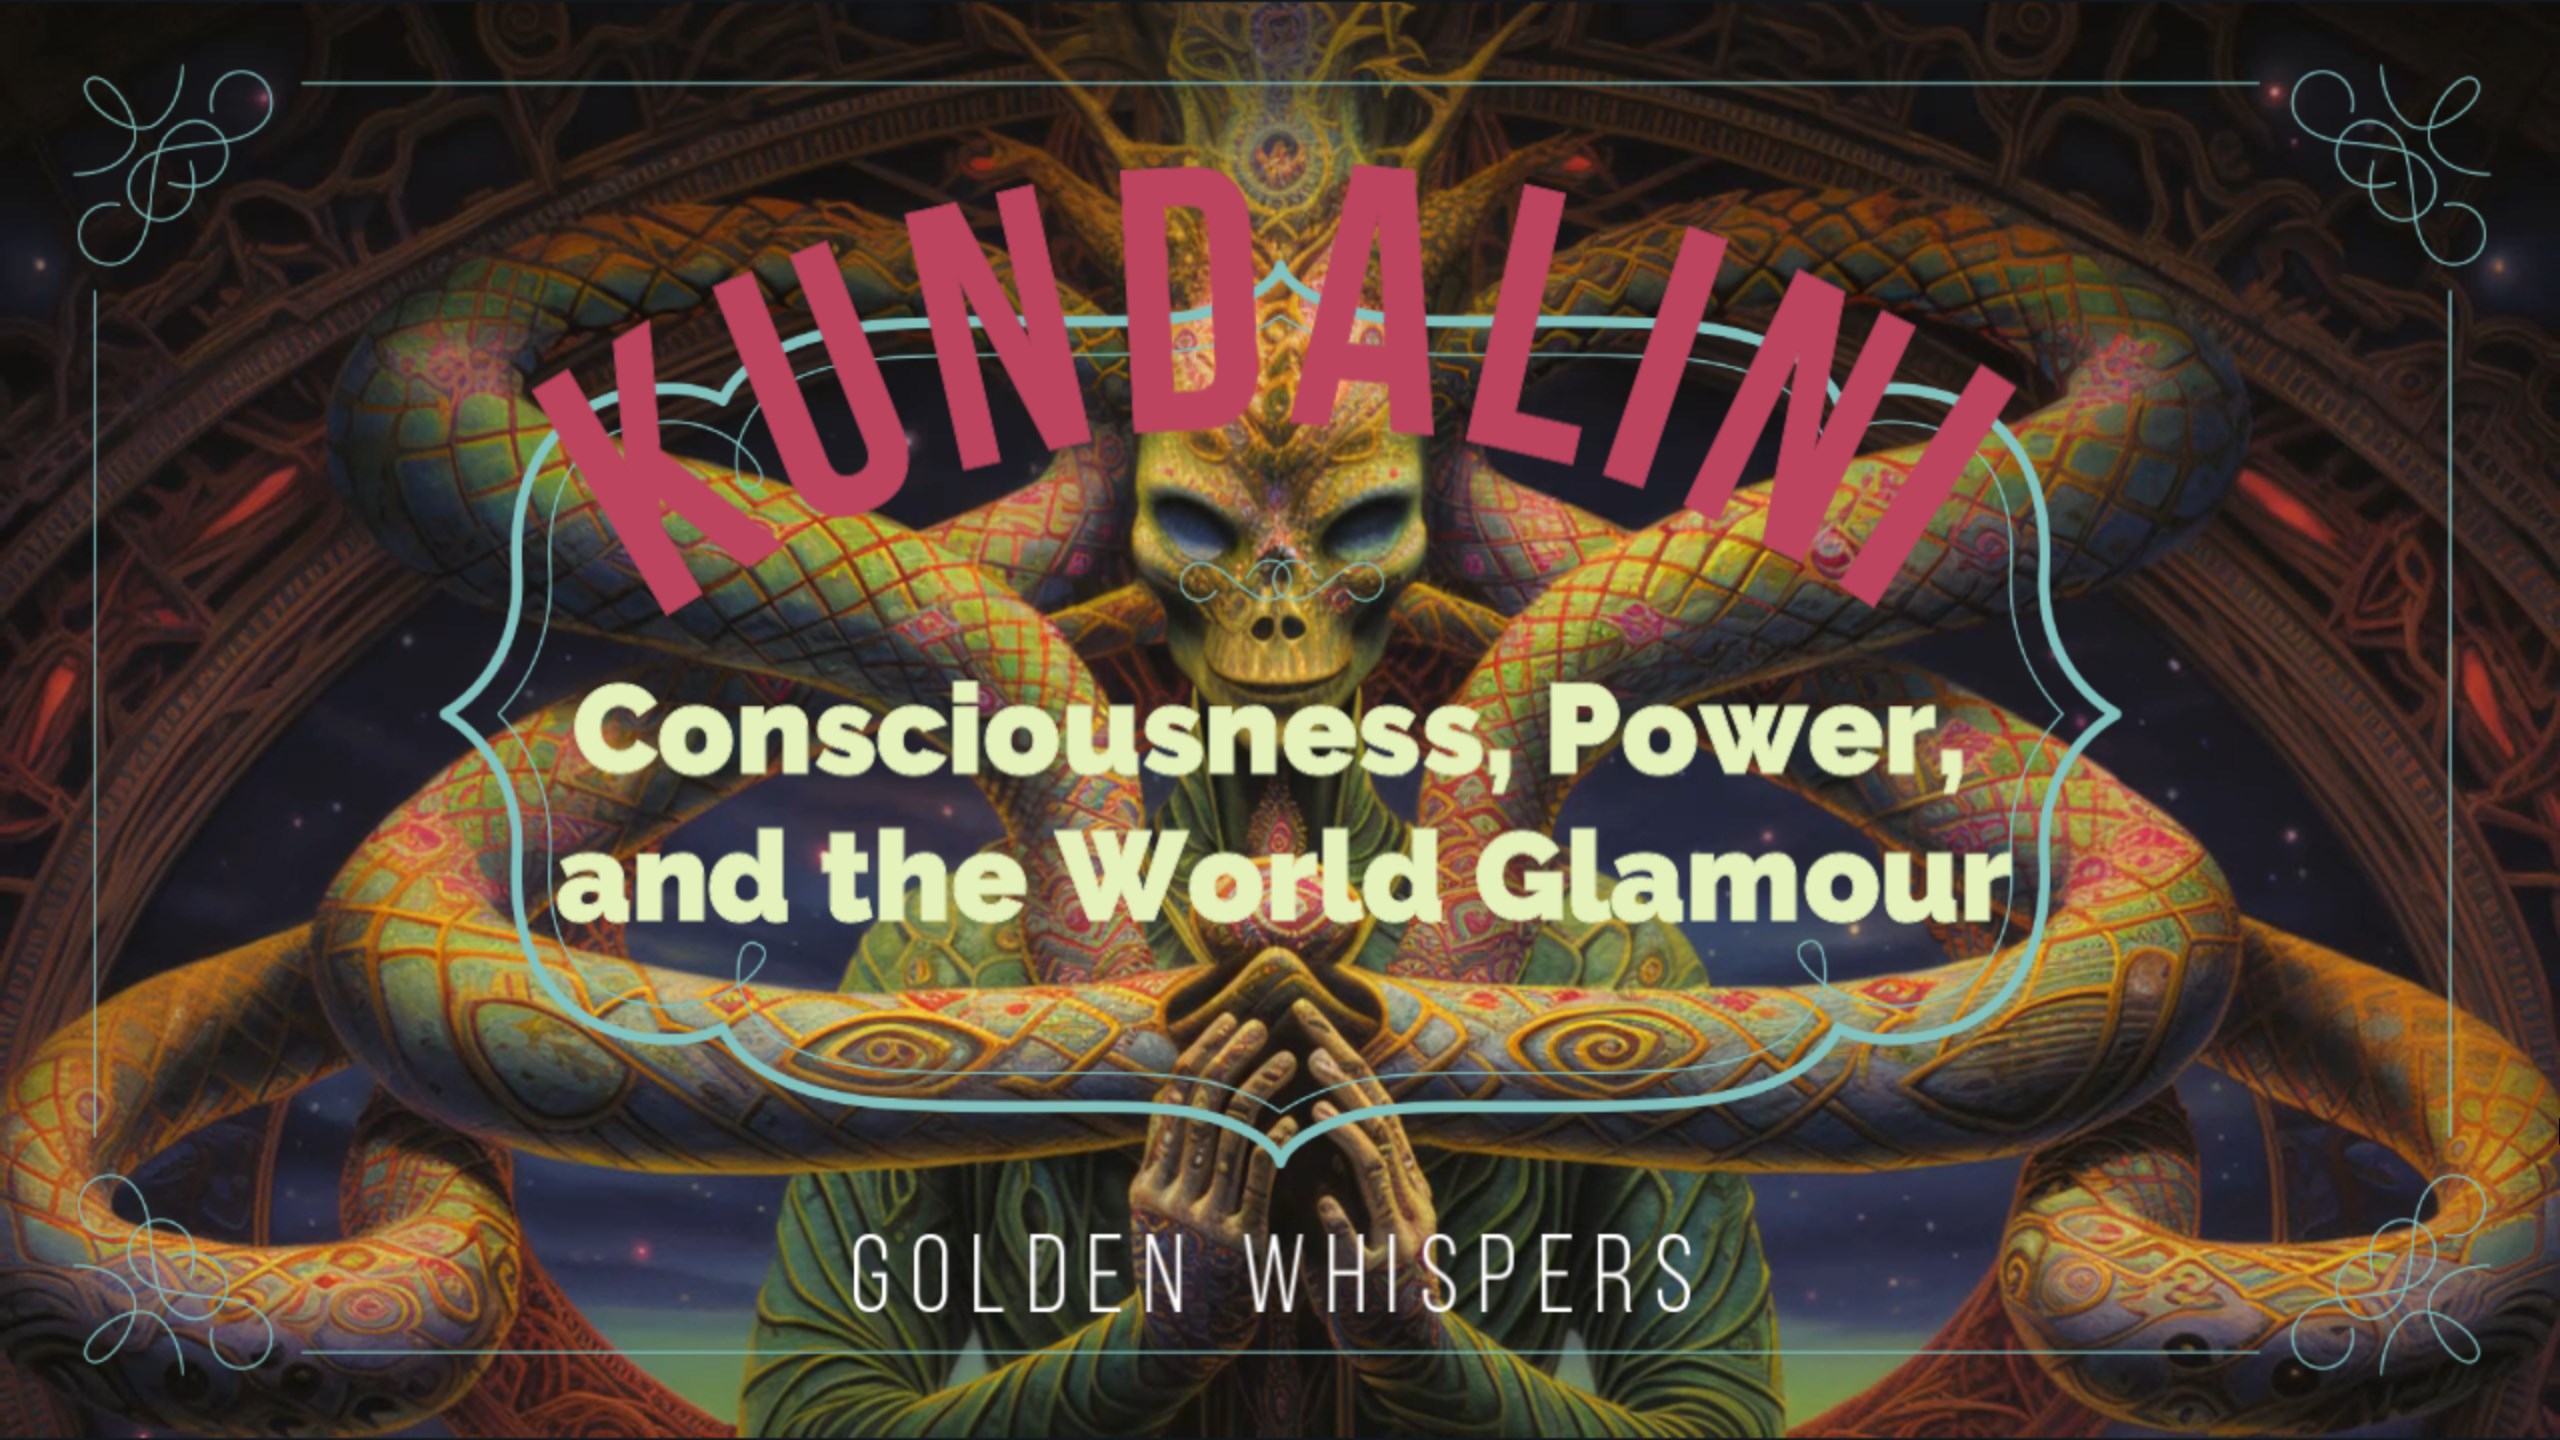 Kundalini; Consciousness, Power, and the World Glamour